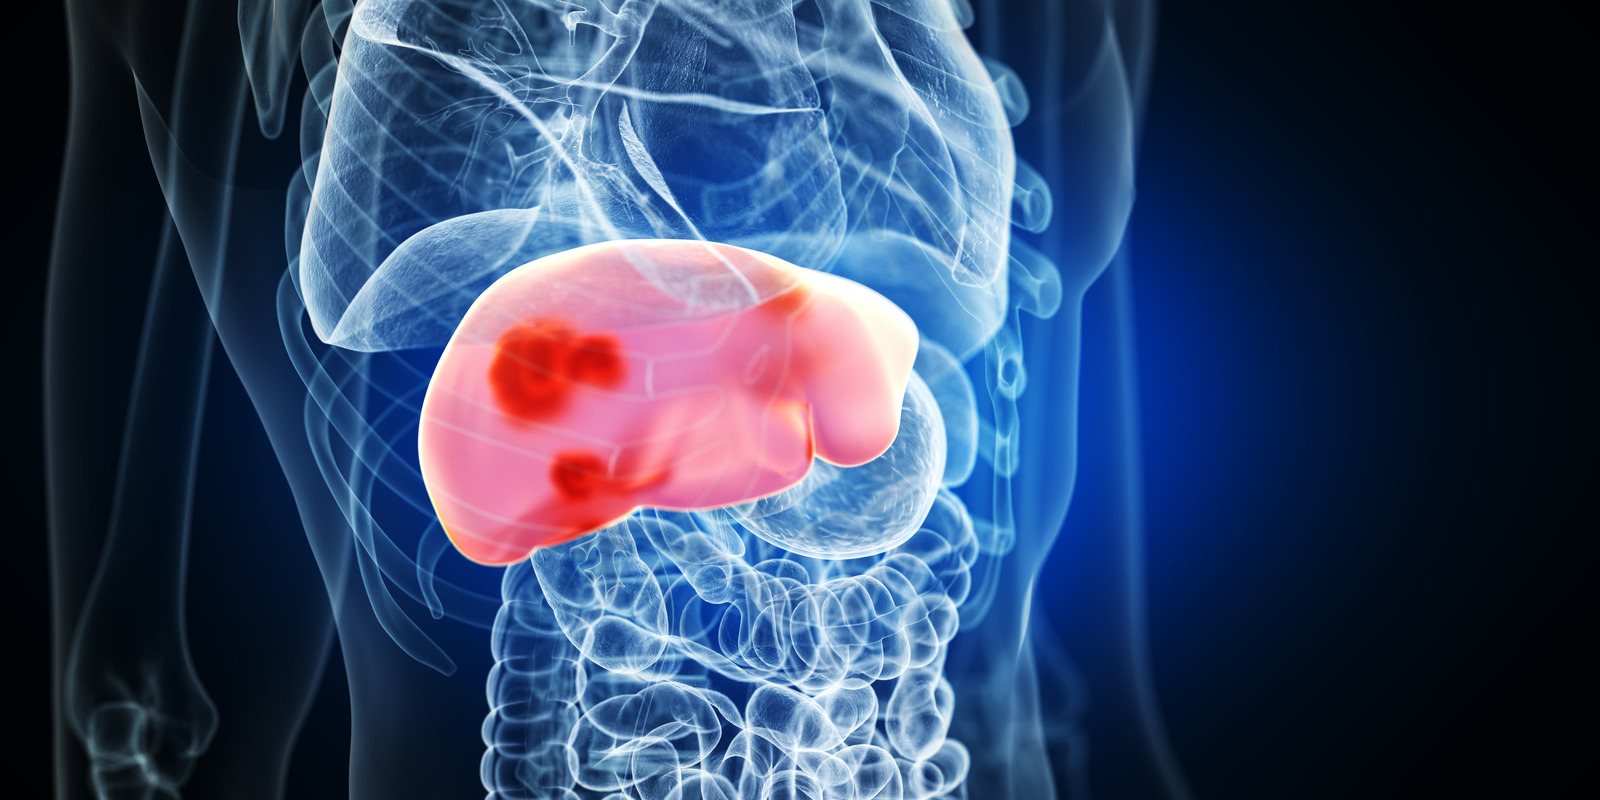 Alcohol's effects on your liver